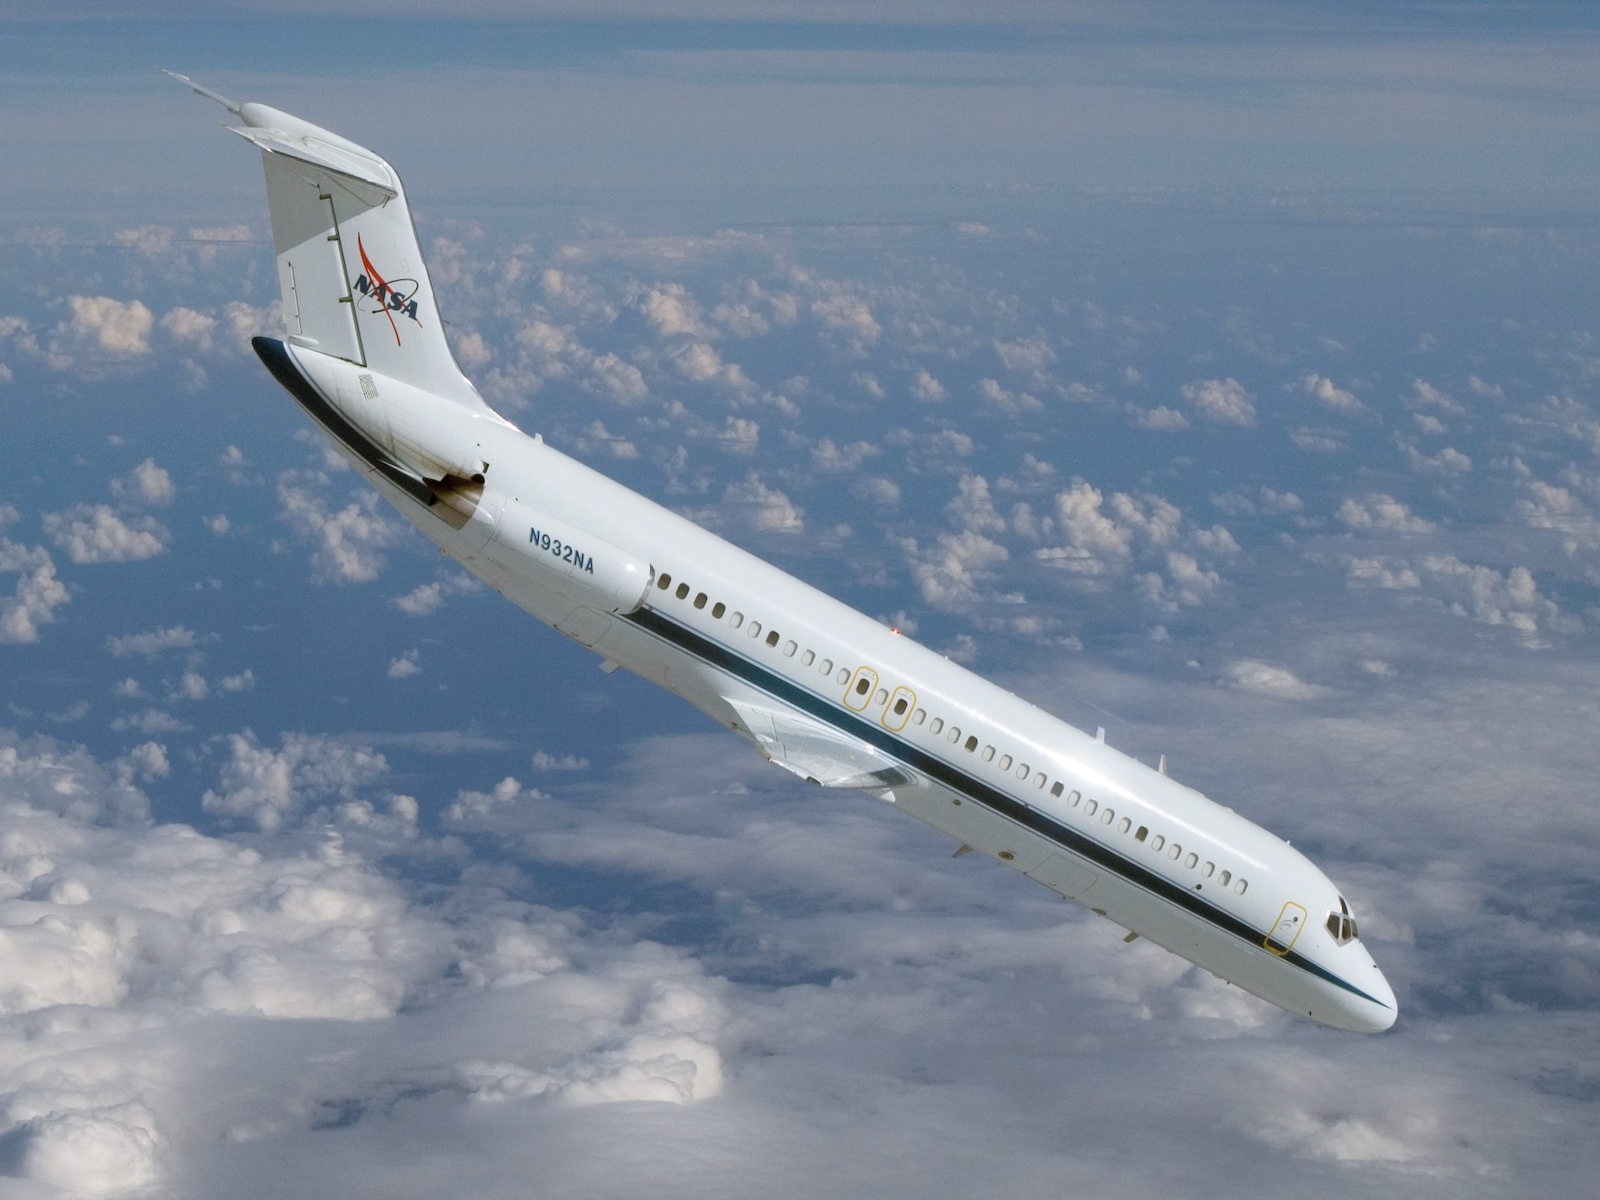 File:DC-9 reduced-gravity training aircraft - going down.jpg ...